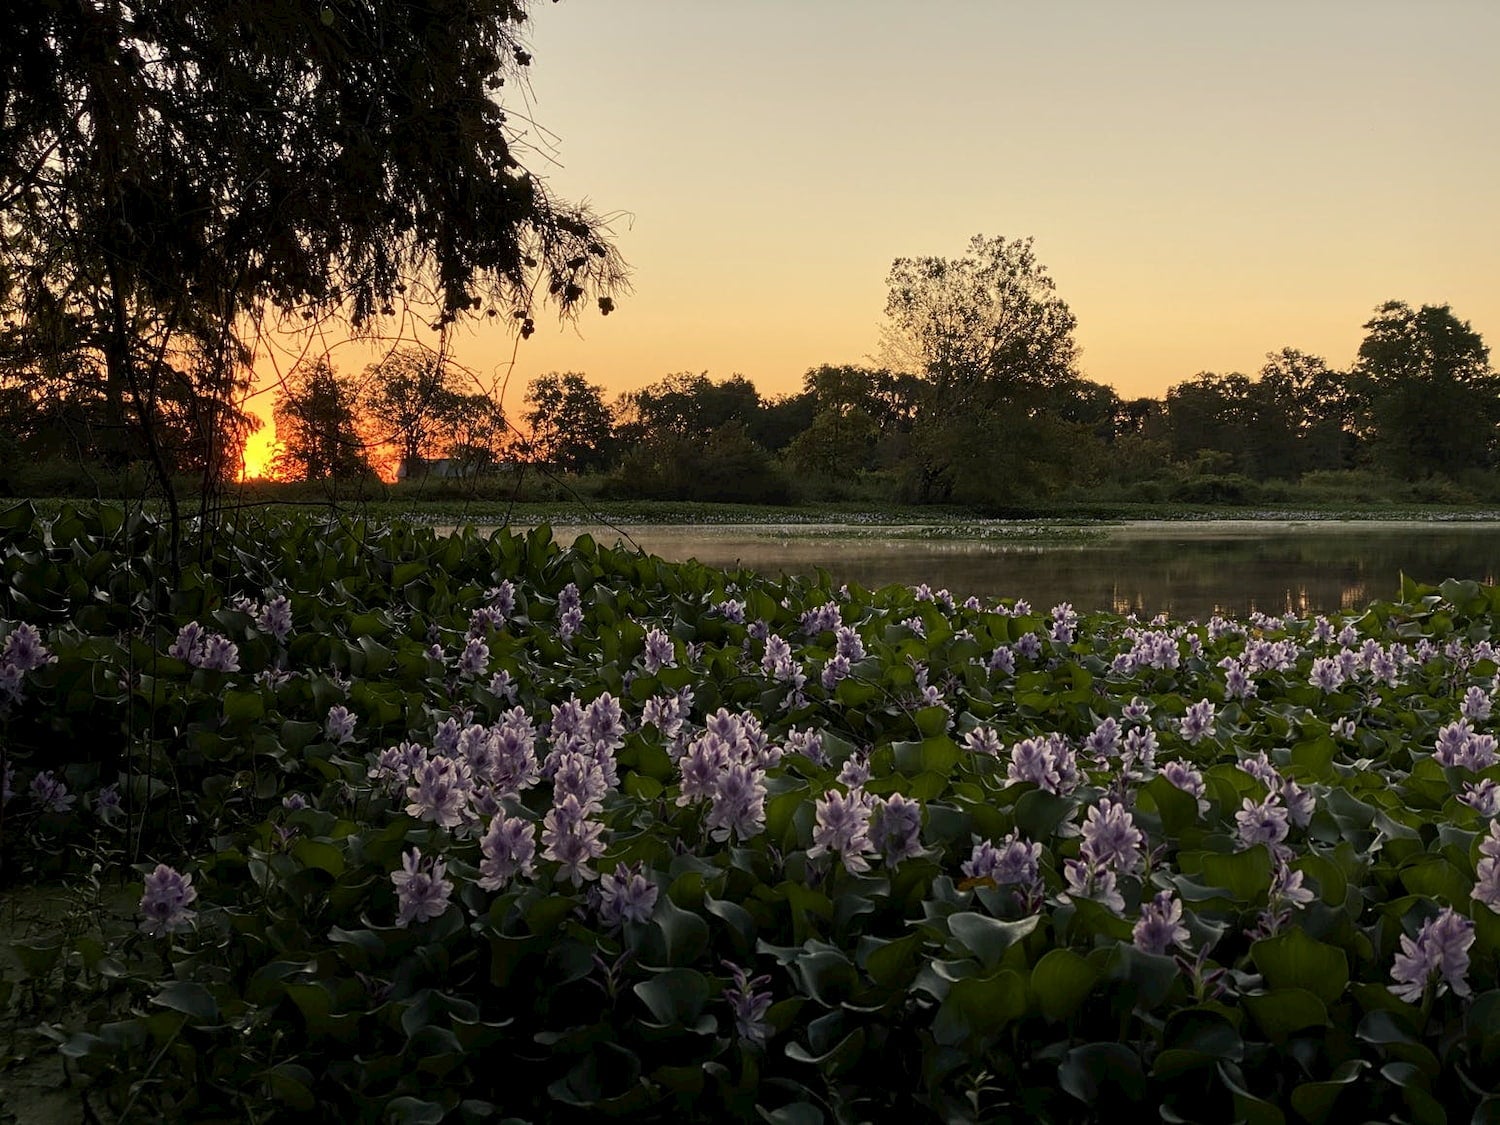 riverside flowers in bloom at sunset